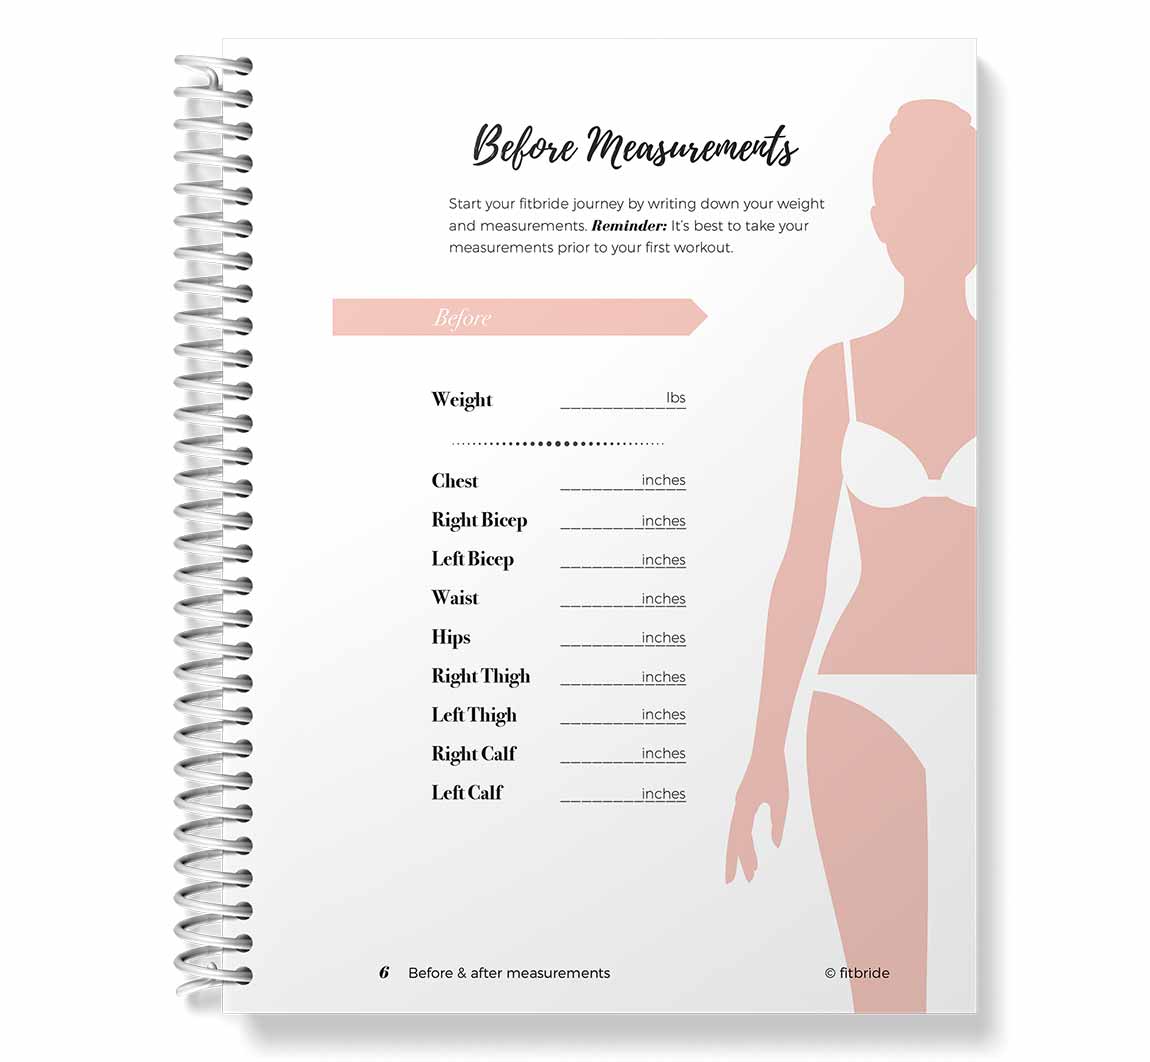 Fitbride workout book before and after measurements page